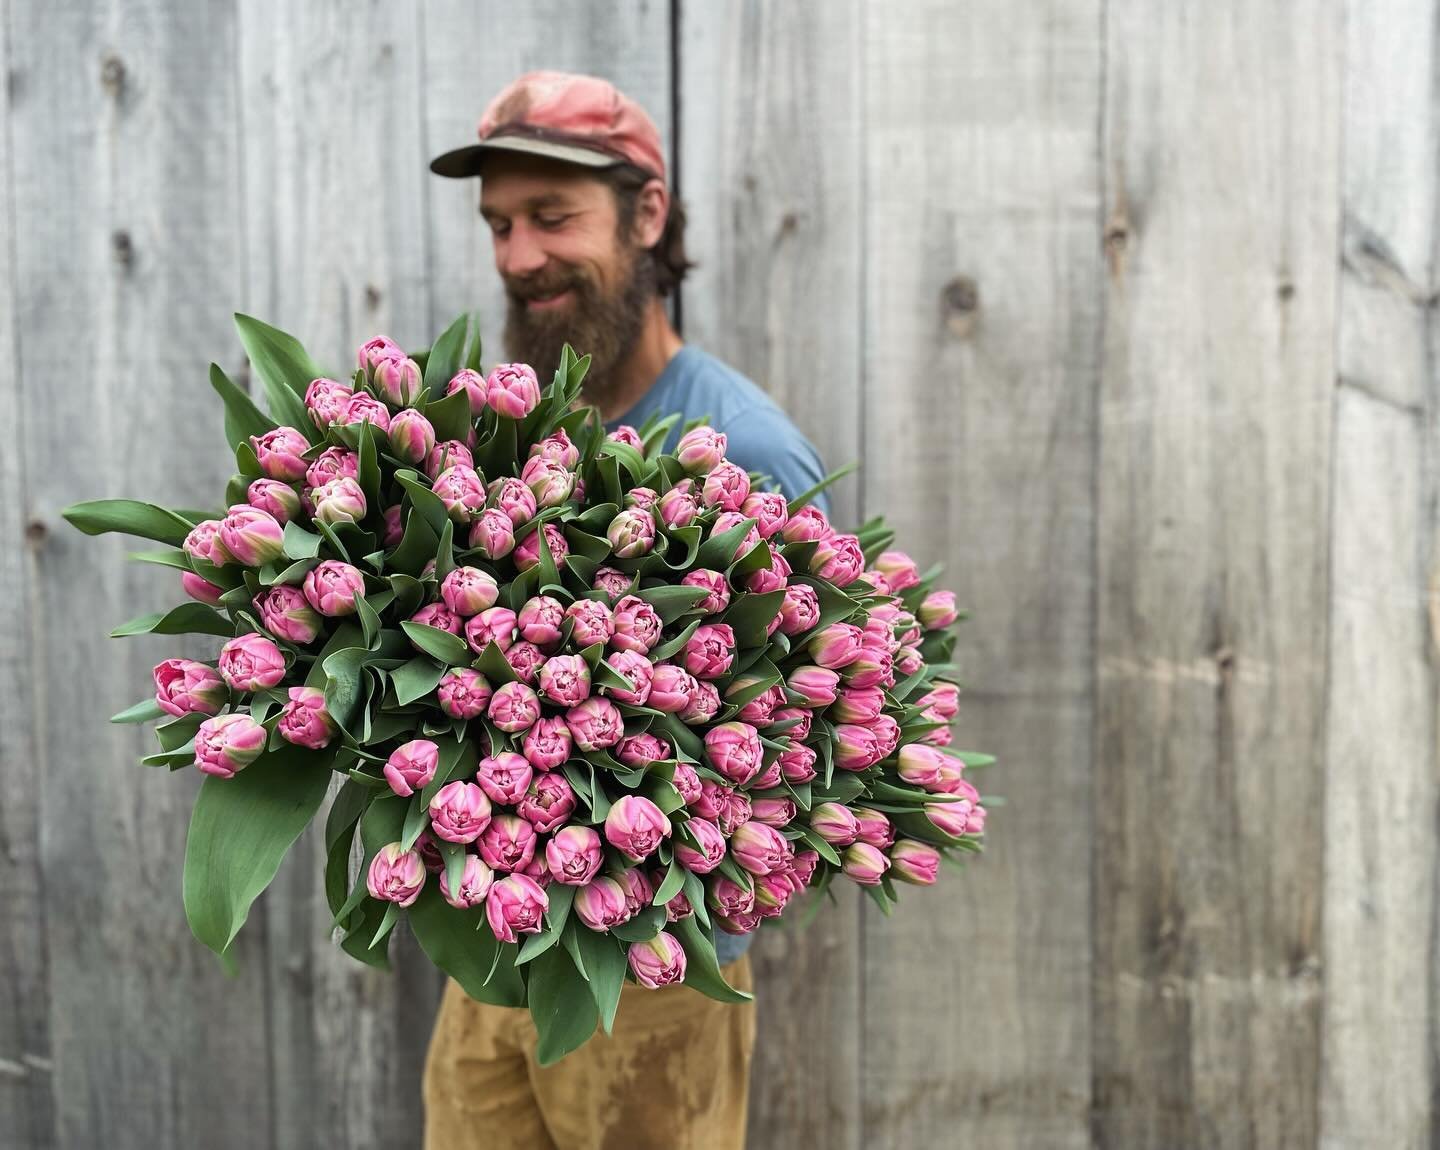 At the risk of losing another good employee cause I forced them to smile with flowers perfectly aestheticized in front of a weathered ship lap pine backdrop, I want to to say that we sell flowers, want people to buy them and they are truly beautiful.